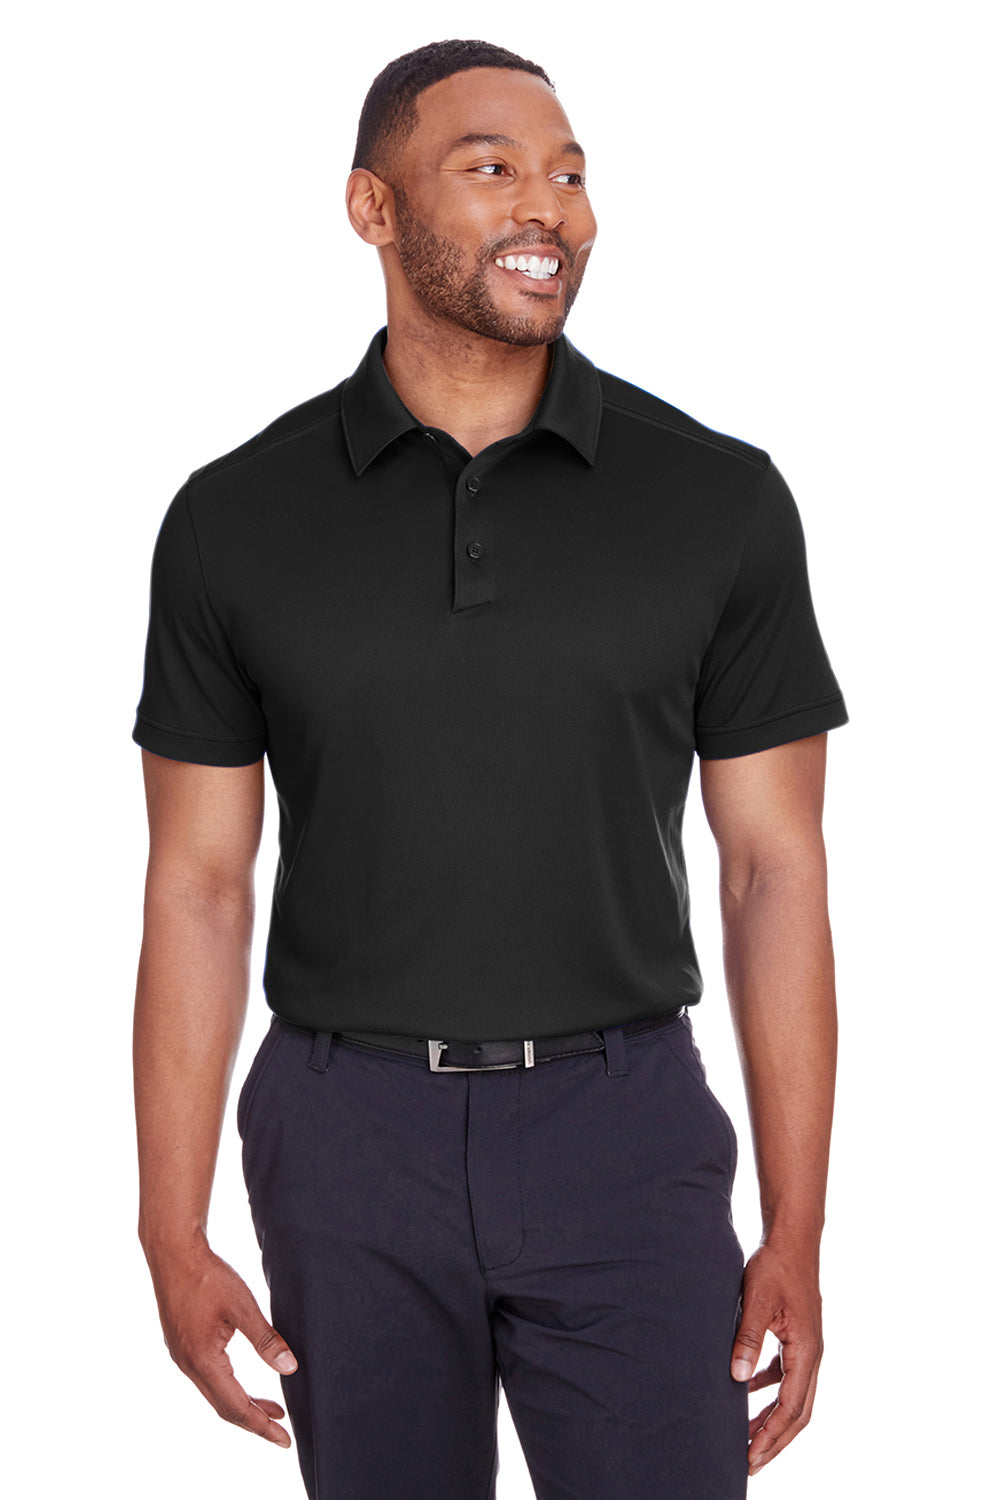 Spyder S16532 Womens Freestyle Short Sleeve Polo Shirt Black Front